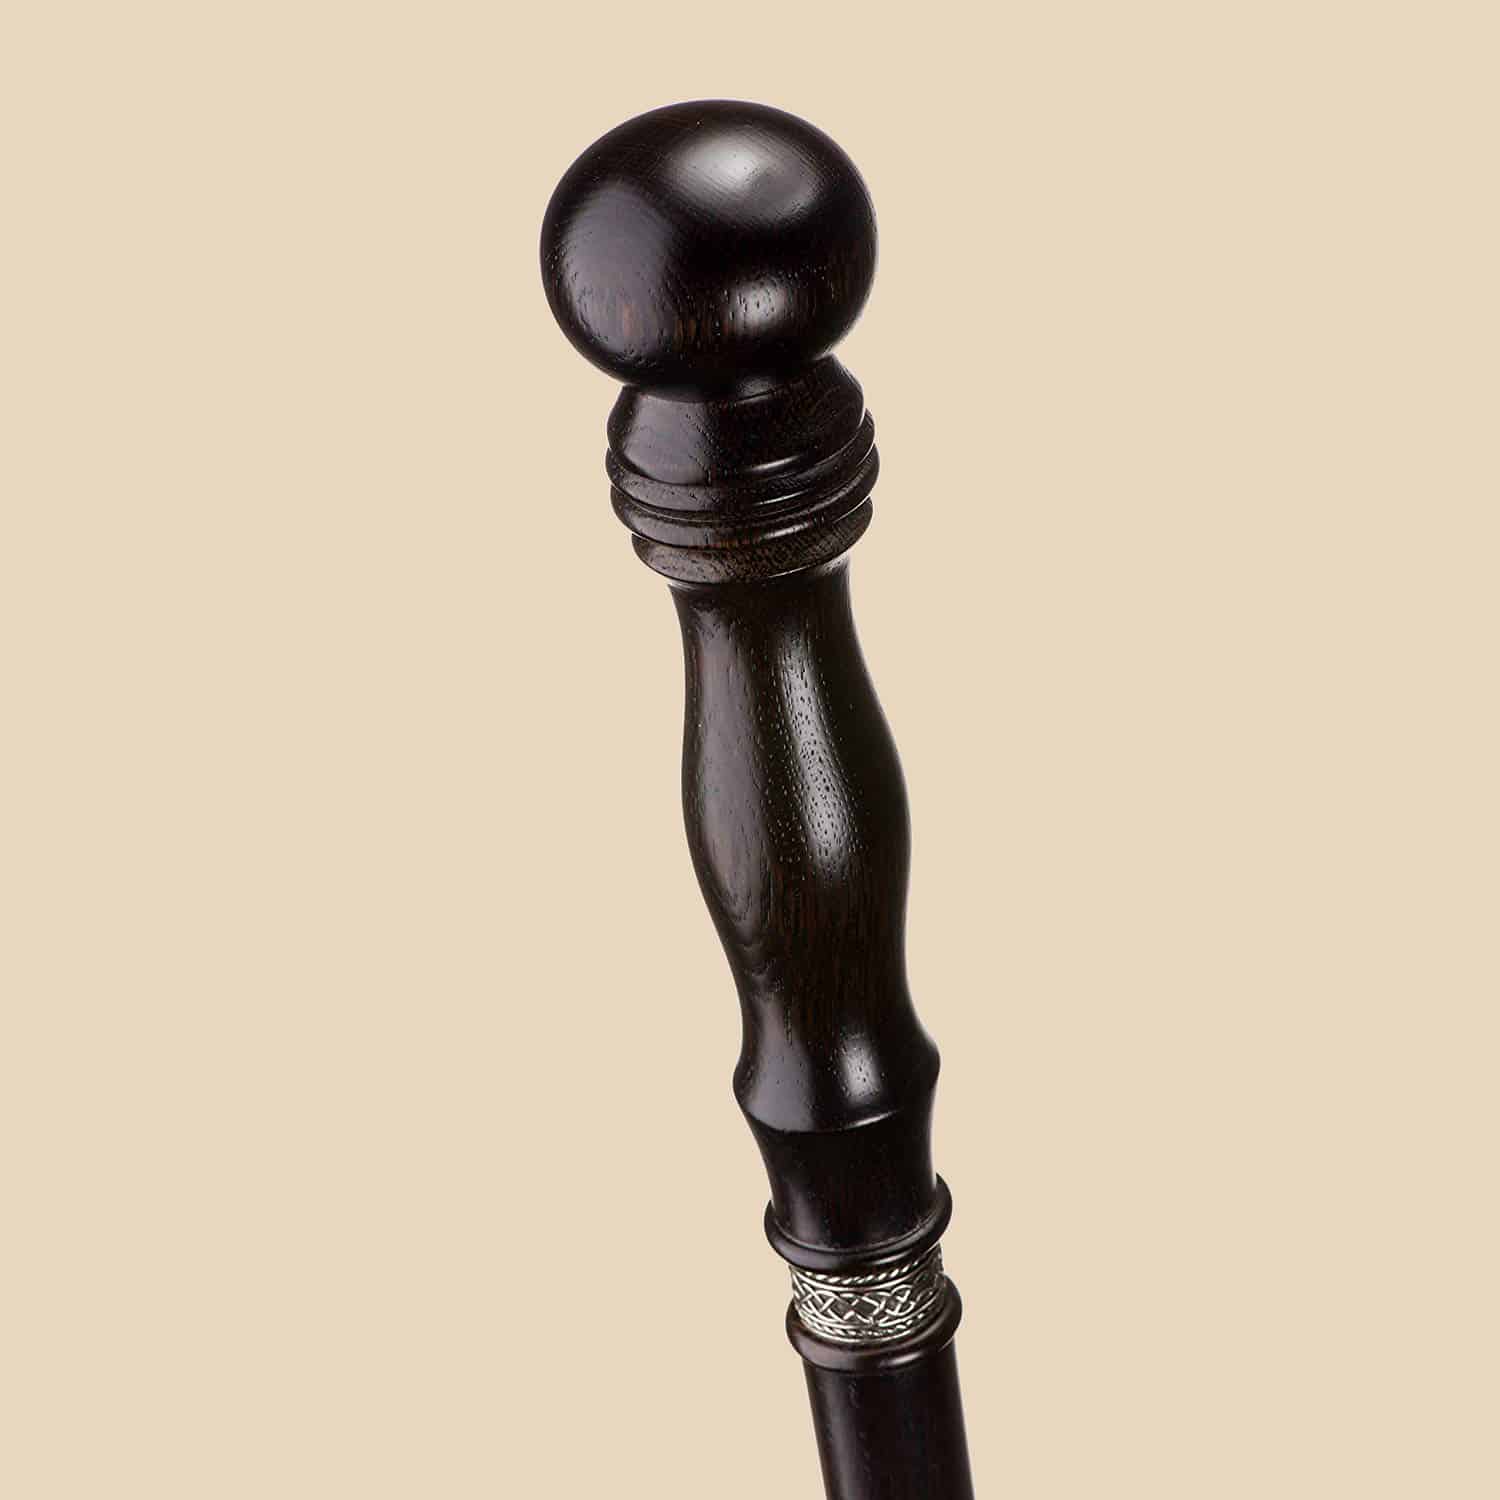 Wooden cane and aluminum telescopic canes with elegant handle